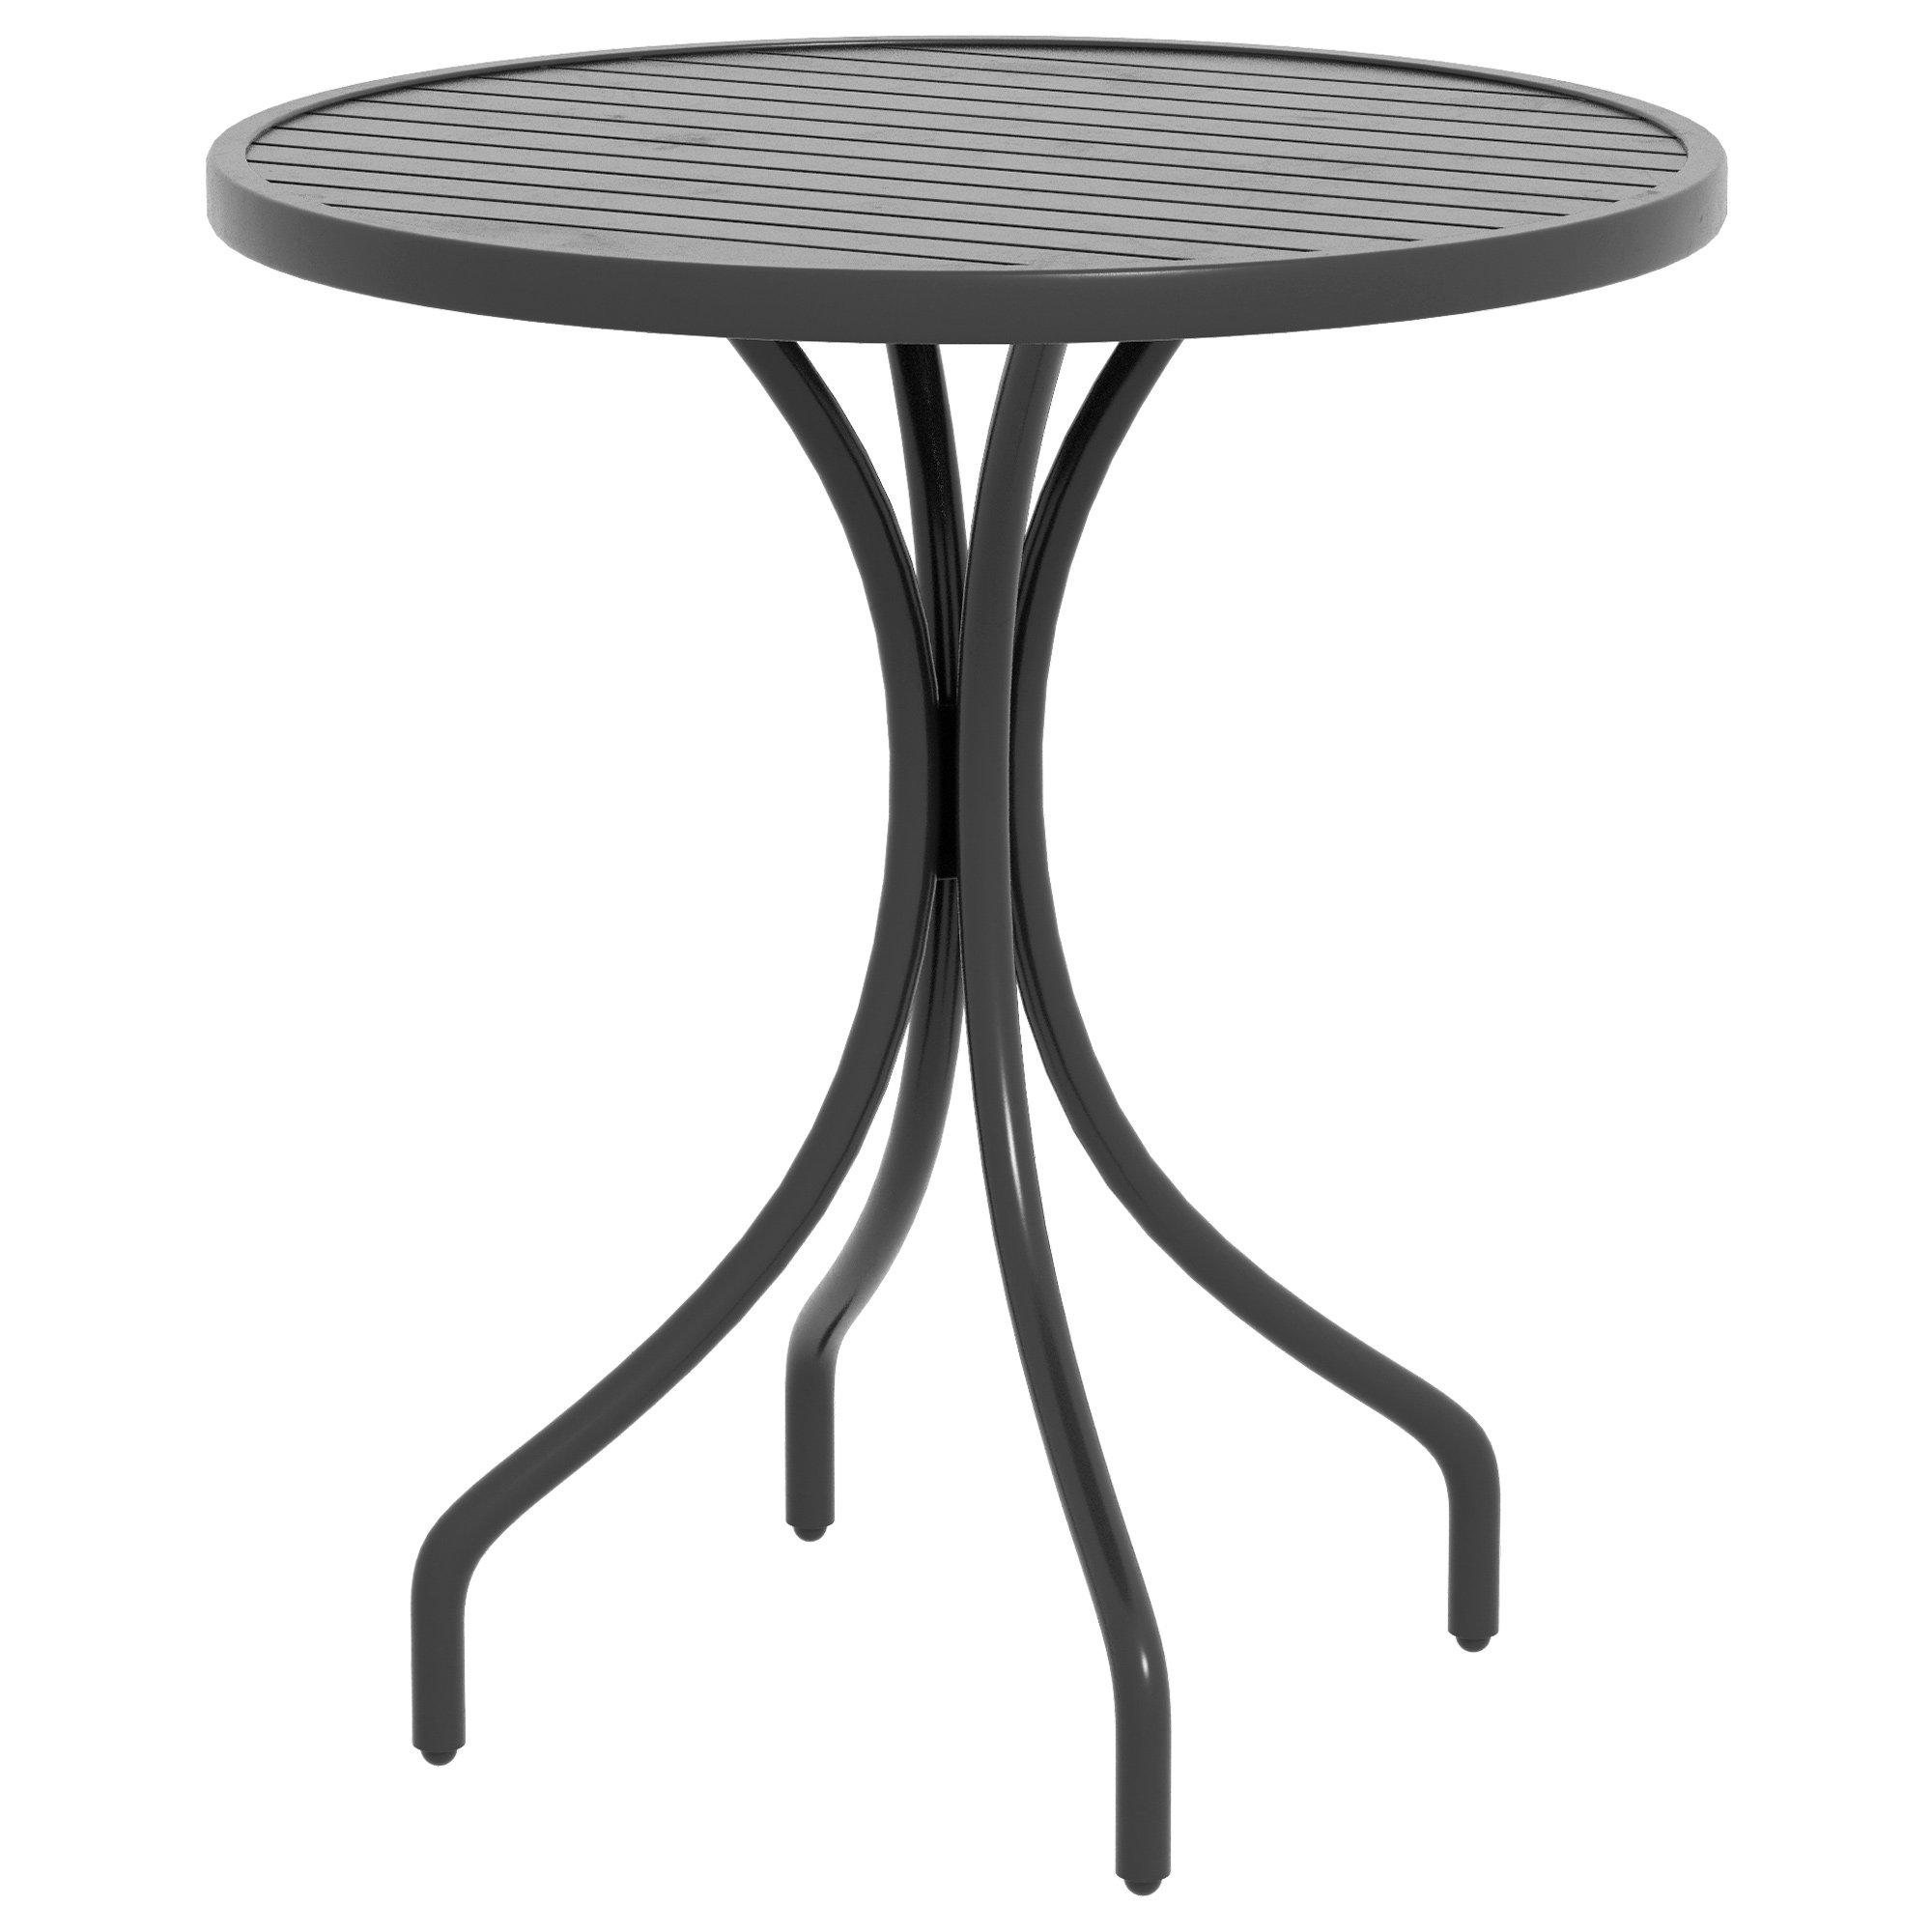 66cm Garden Table, Round Patio Table with Steel Frame and Slat Tabletop